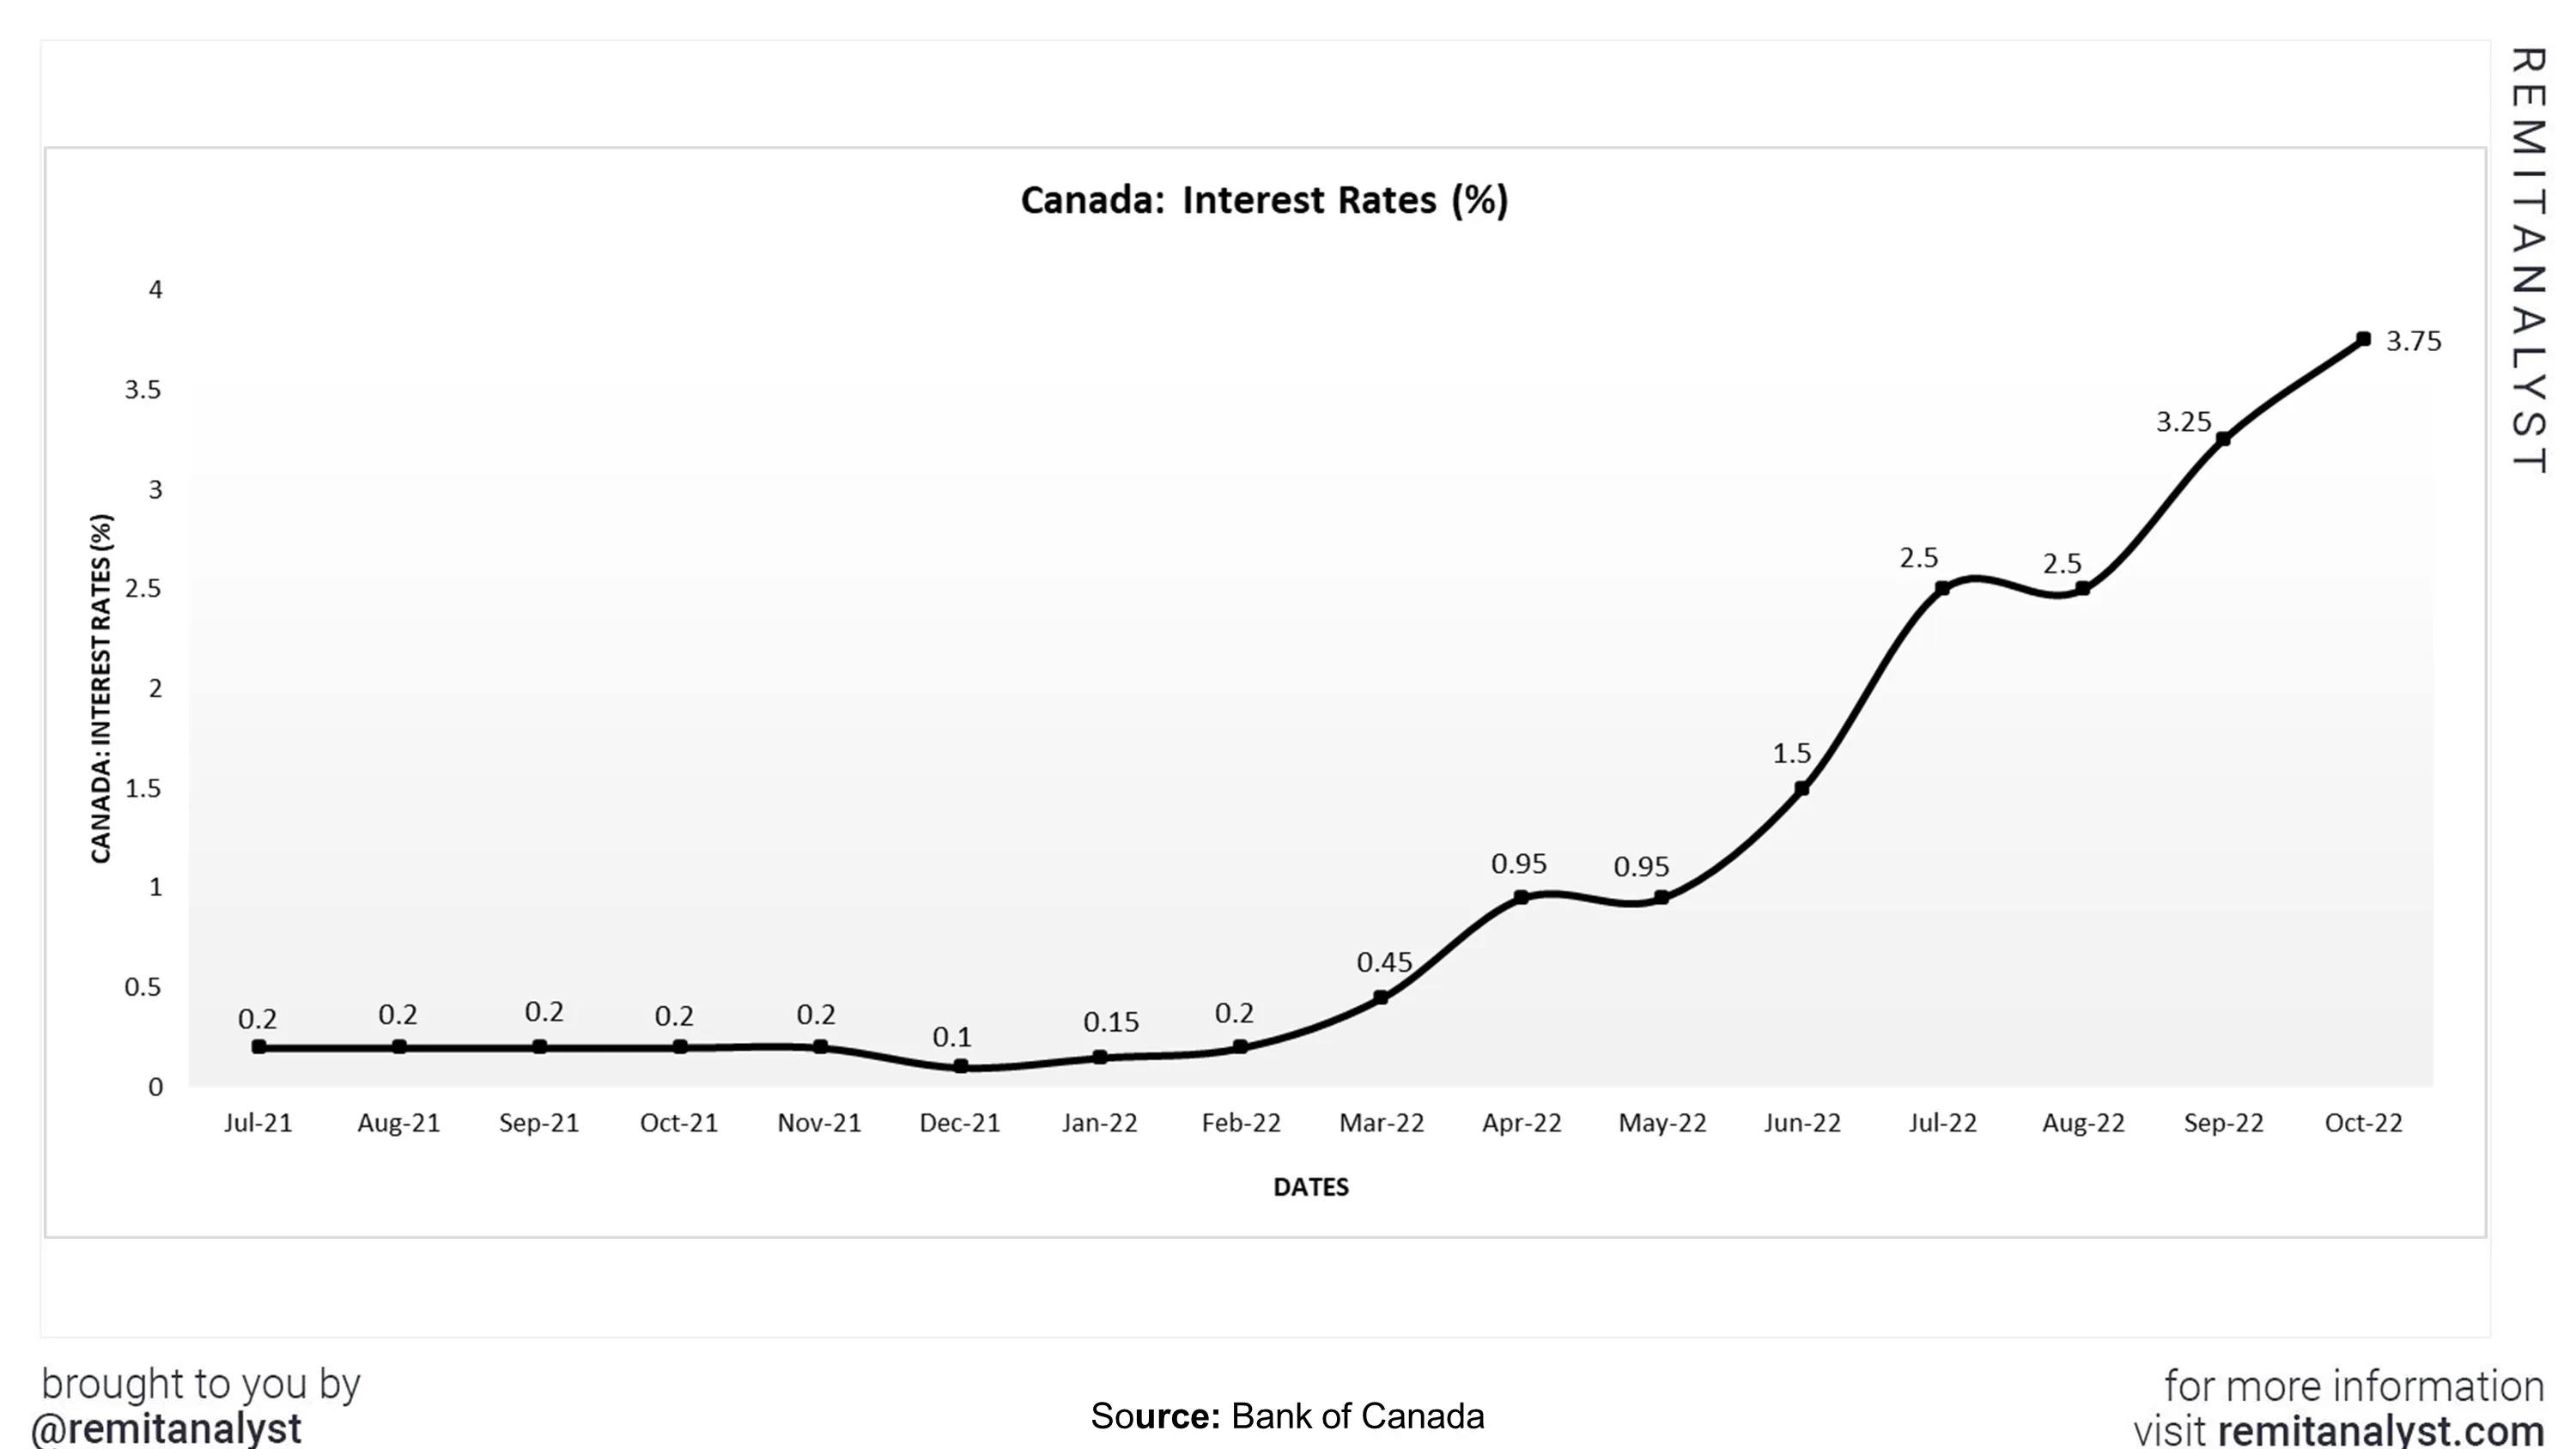 interest-rates-canada-from-jul-2021-to-oct-2022